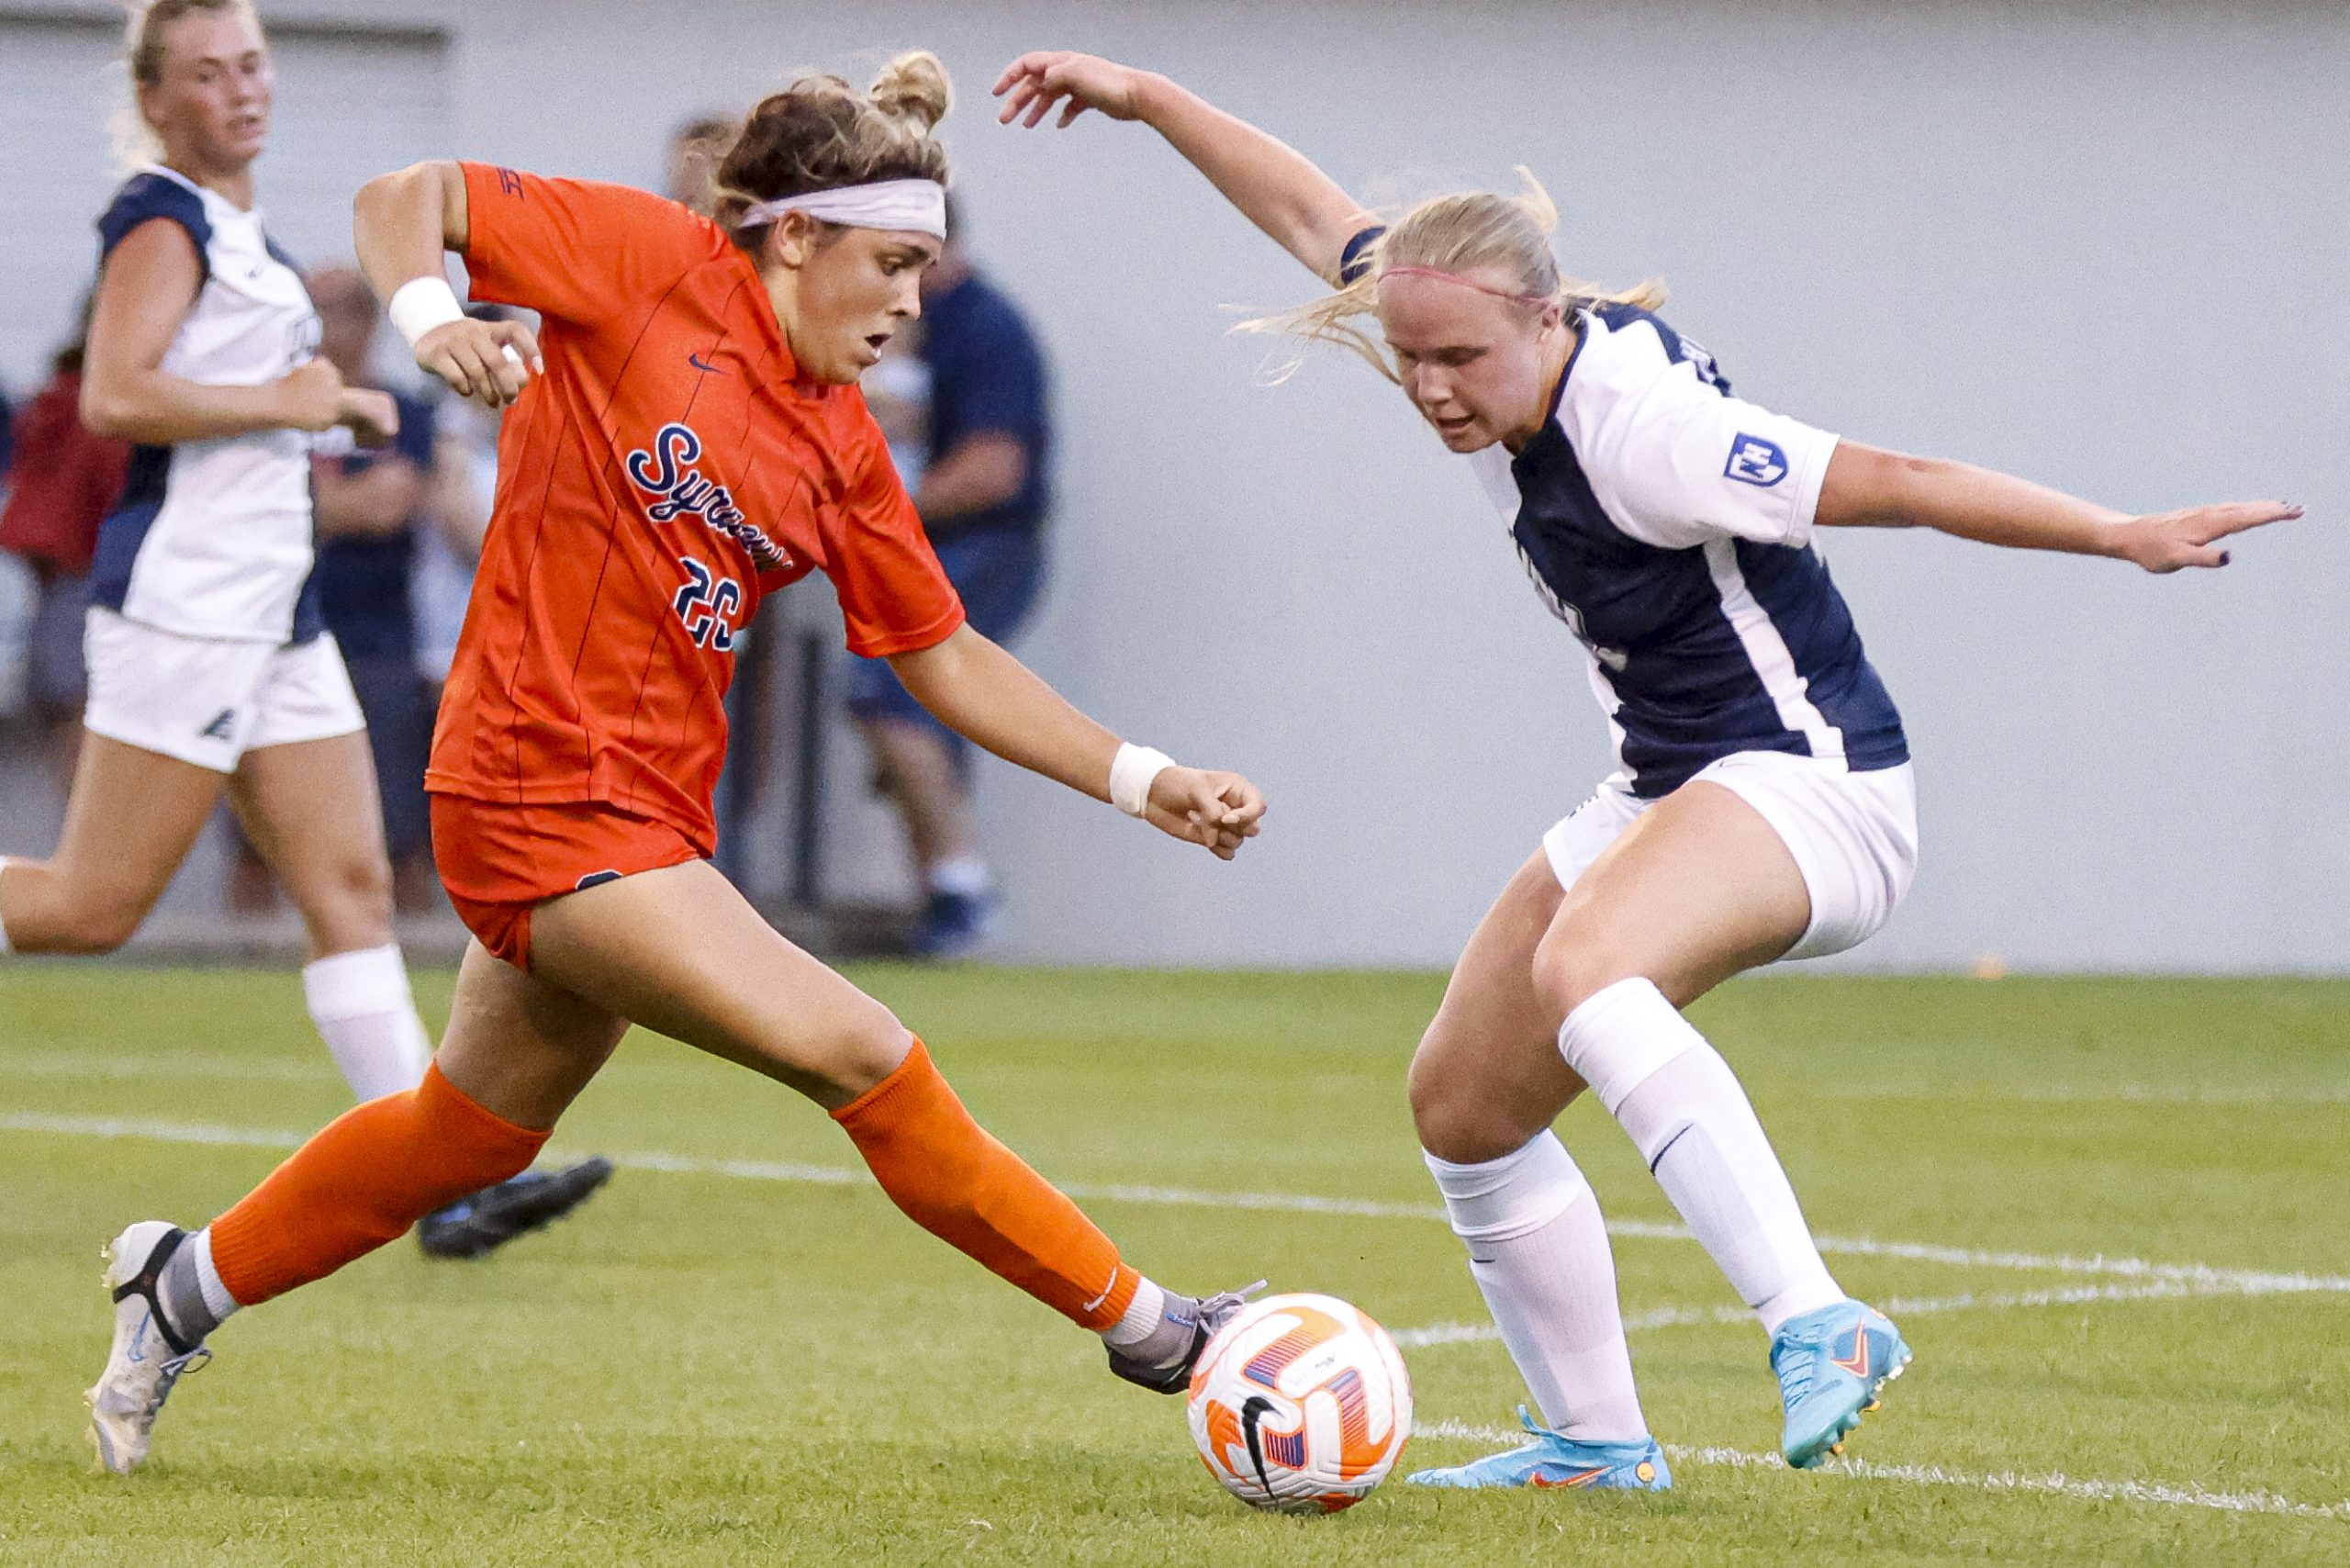 Syracuse's Erin Fleury, left, attempts to move around New Hampshire's Delaney Diltz during a non-conference women's soccer game on Thursday at SU Soccer Stadium.